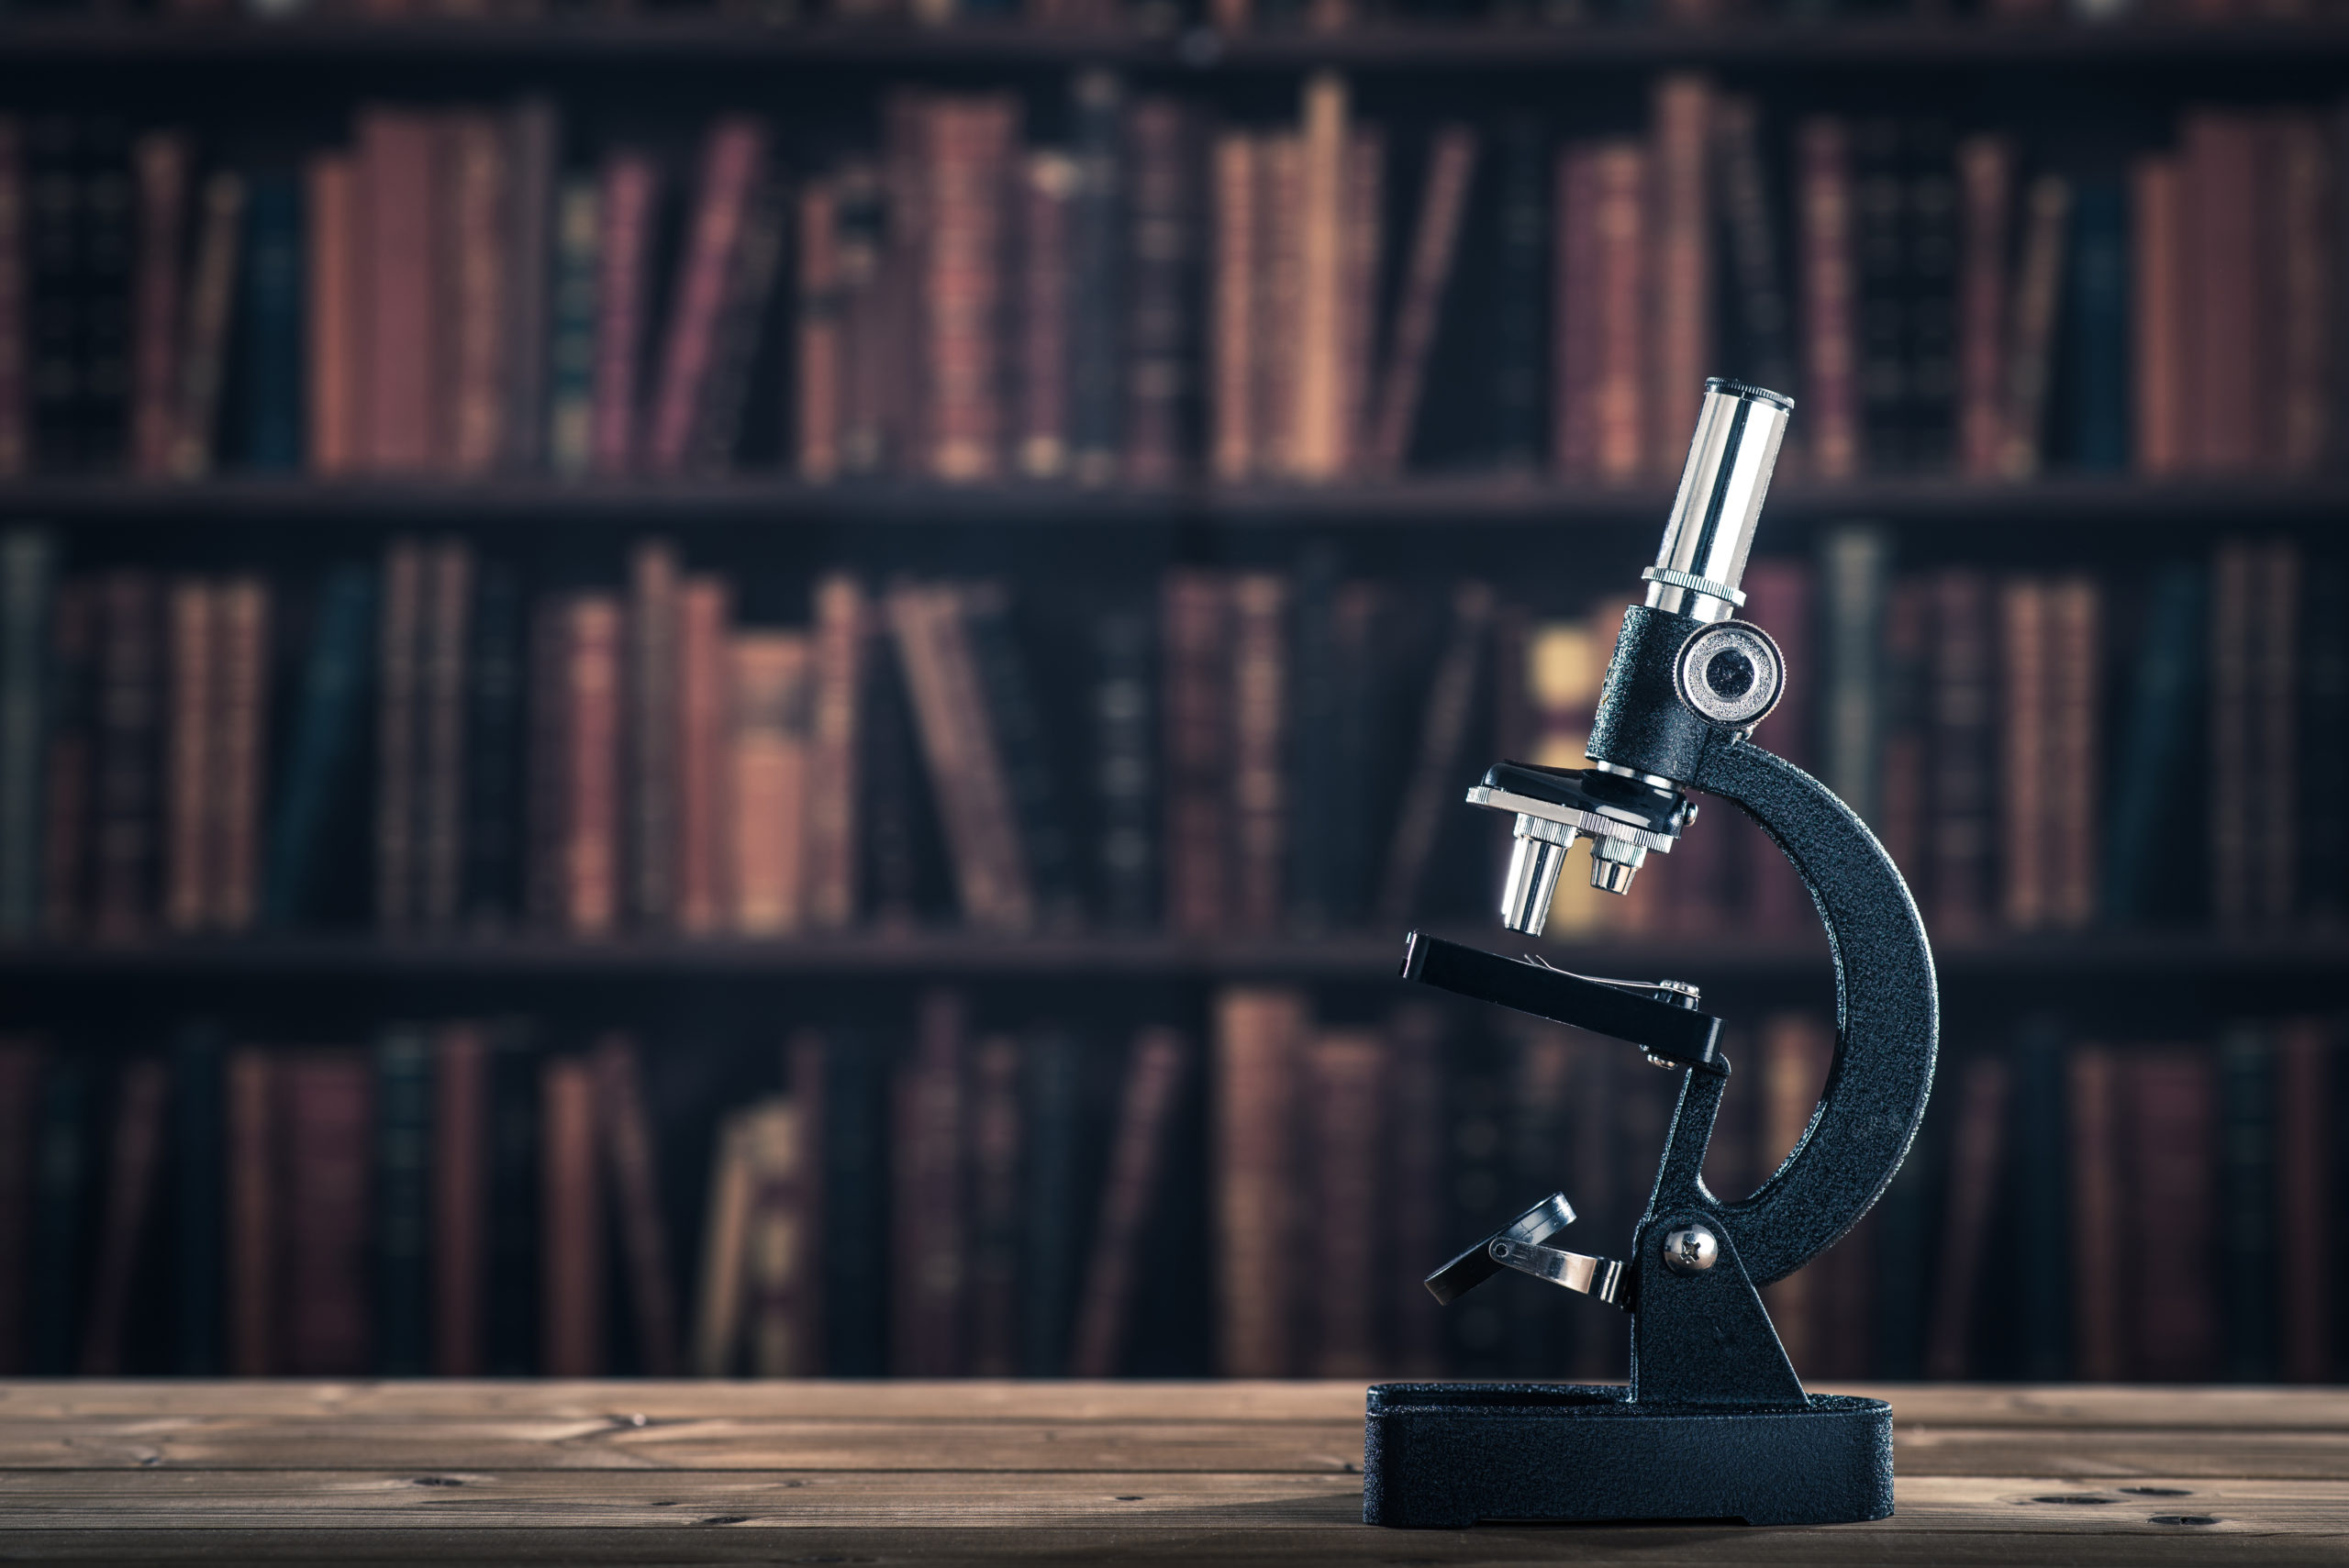 Microscope in library of books